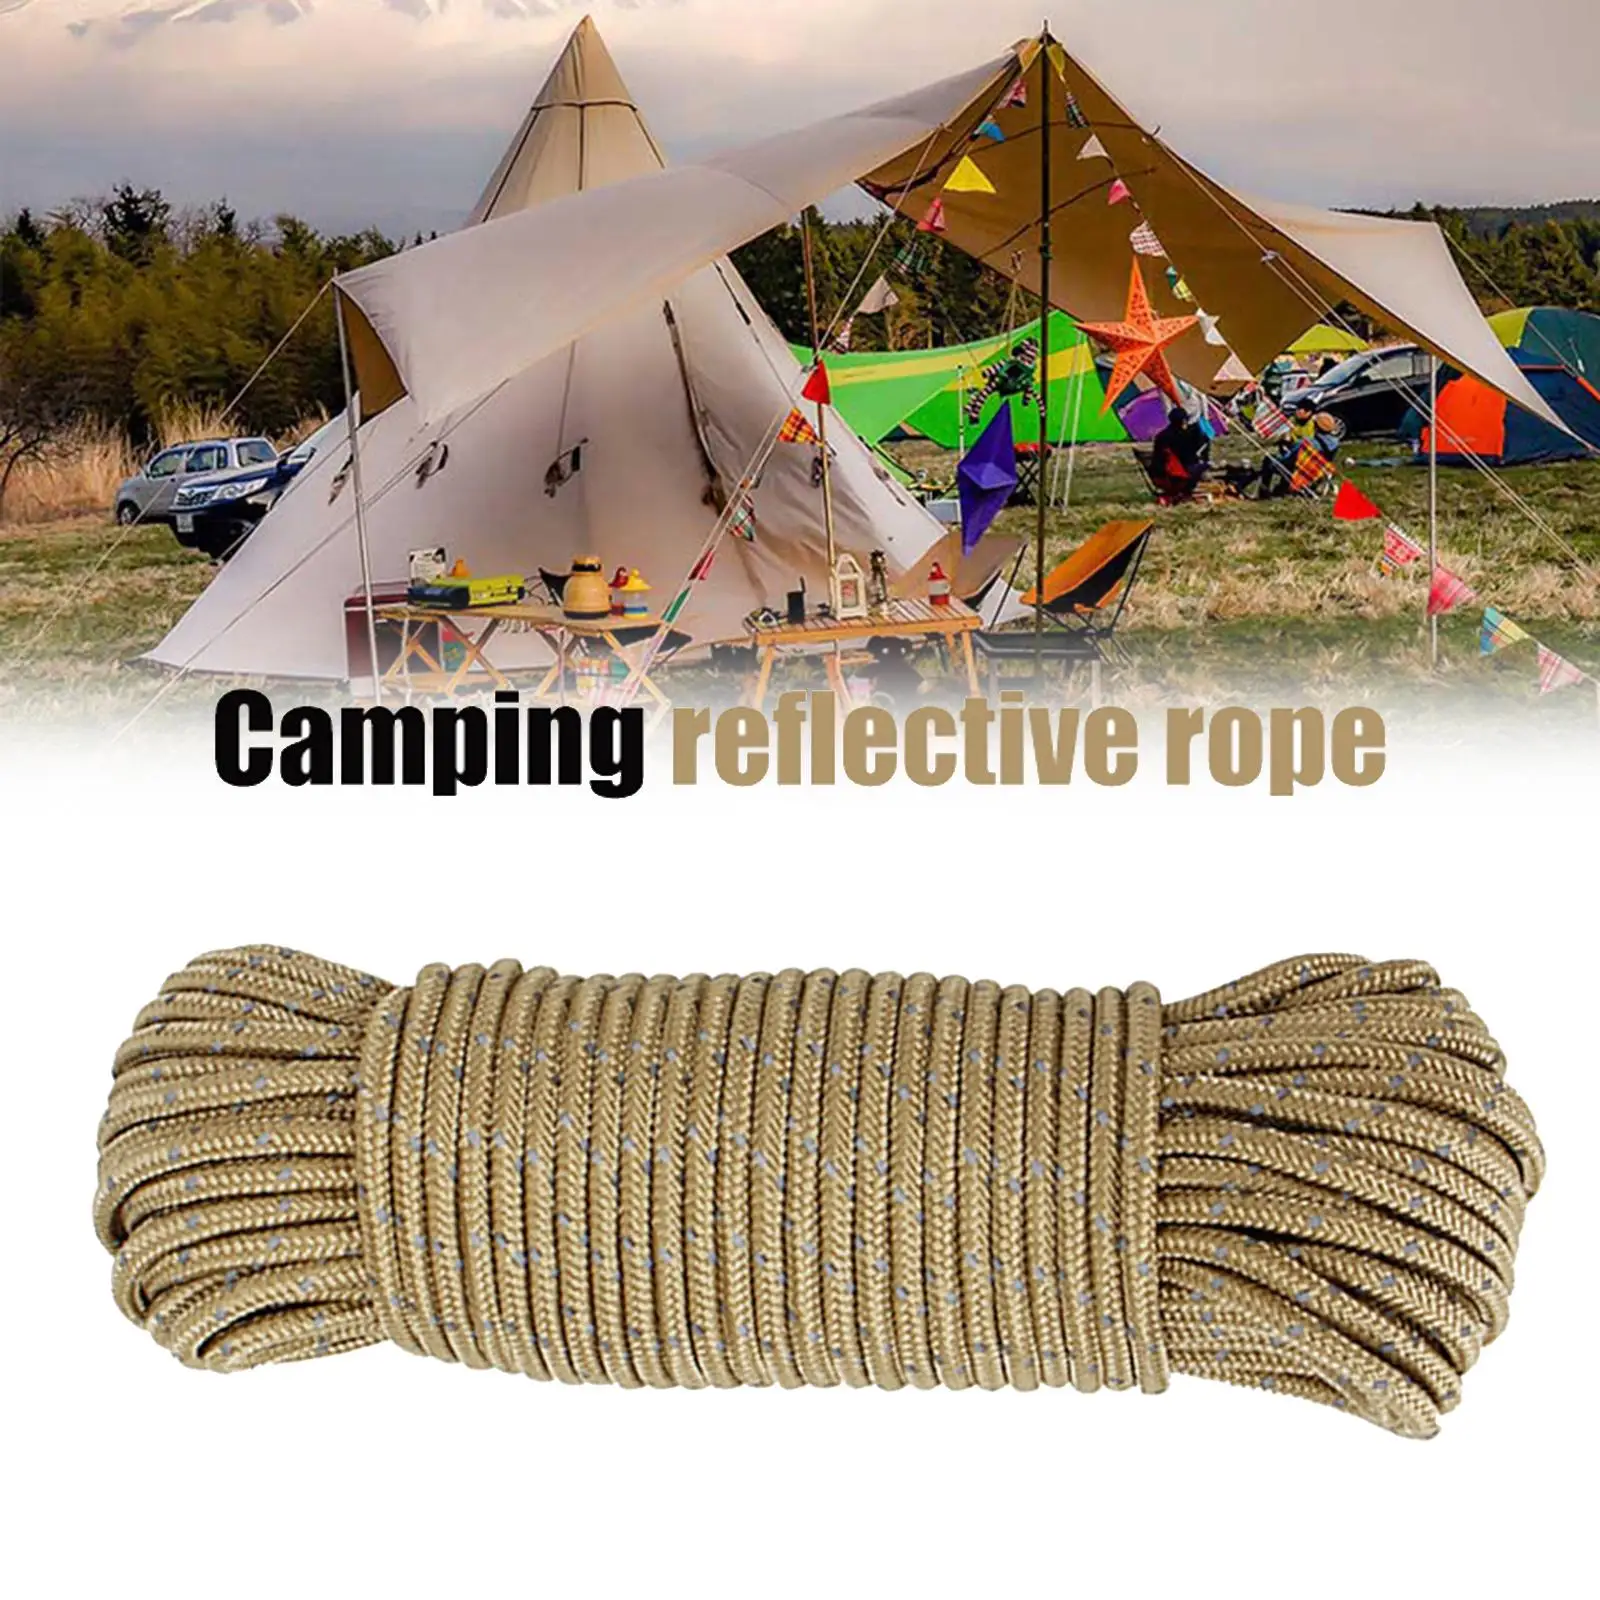 High-Strength Reflective Guy Lines Tent Cord Multi Utility Camping Rope for Outdoor Tying Down Tarps Backpacking Hiking Supplies